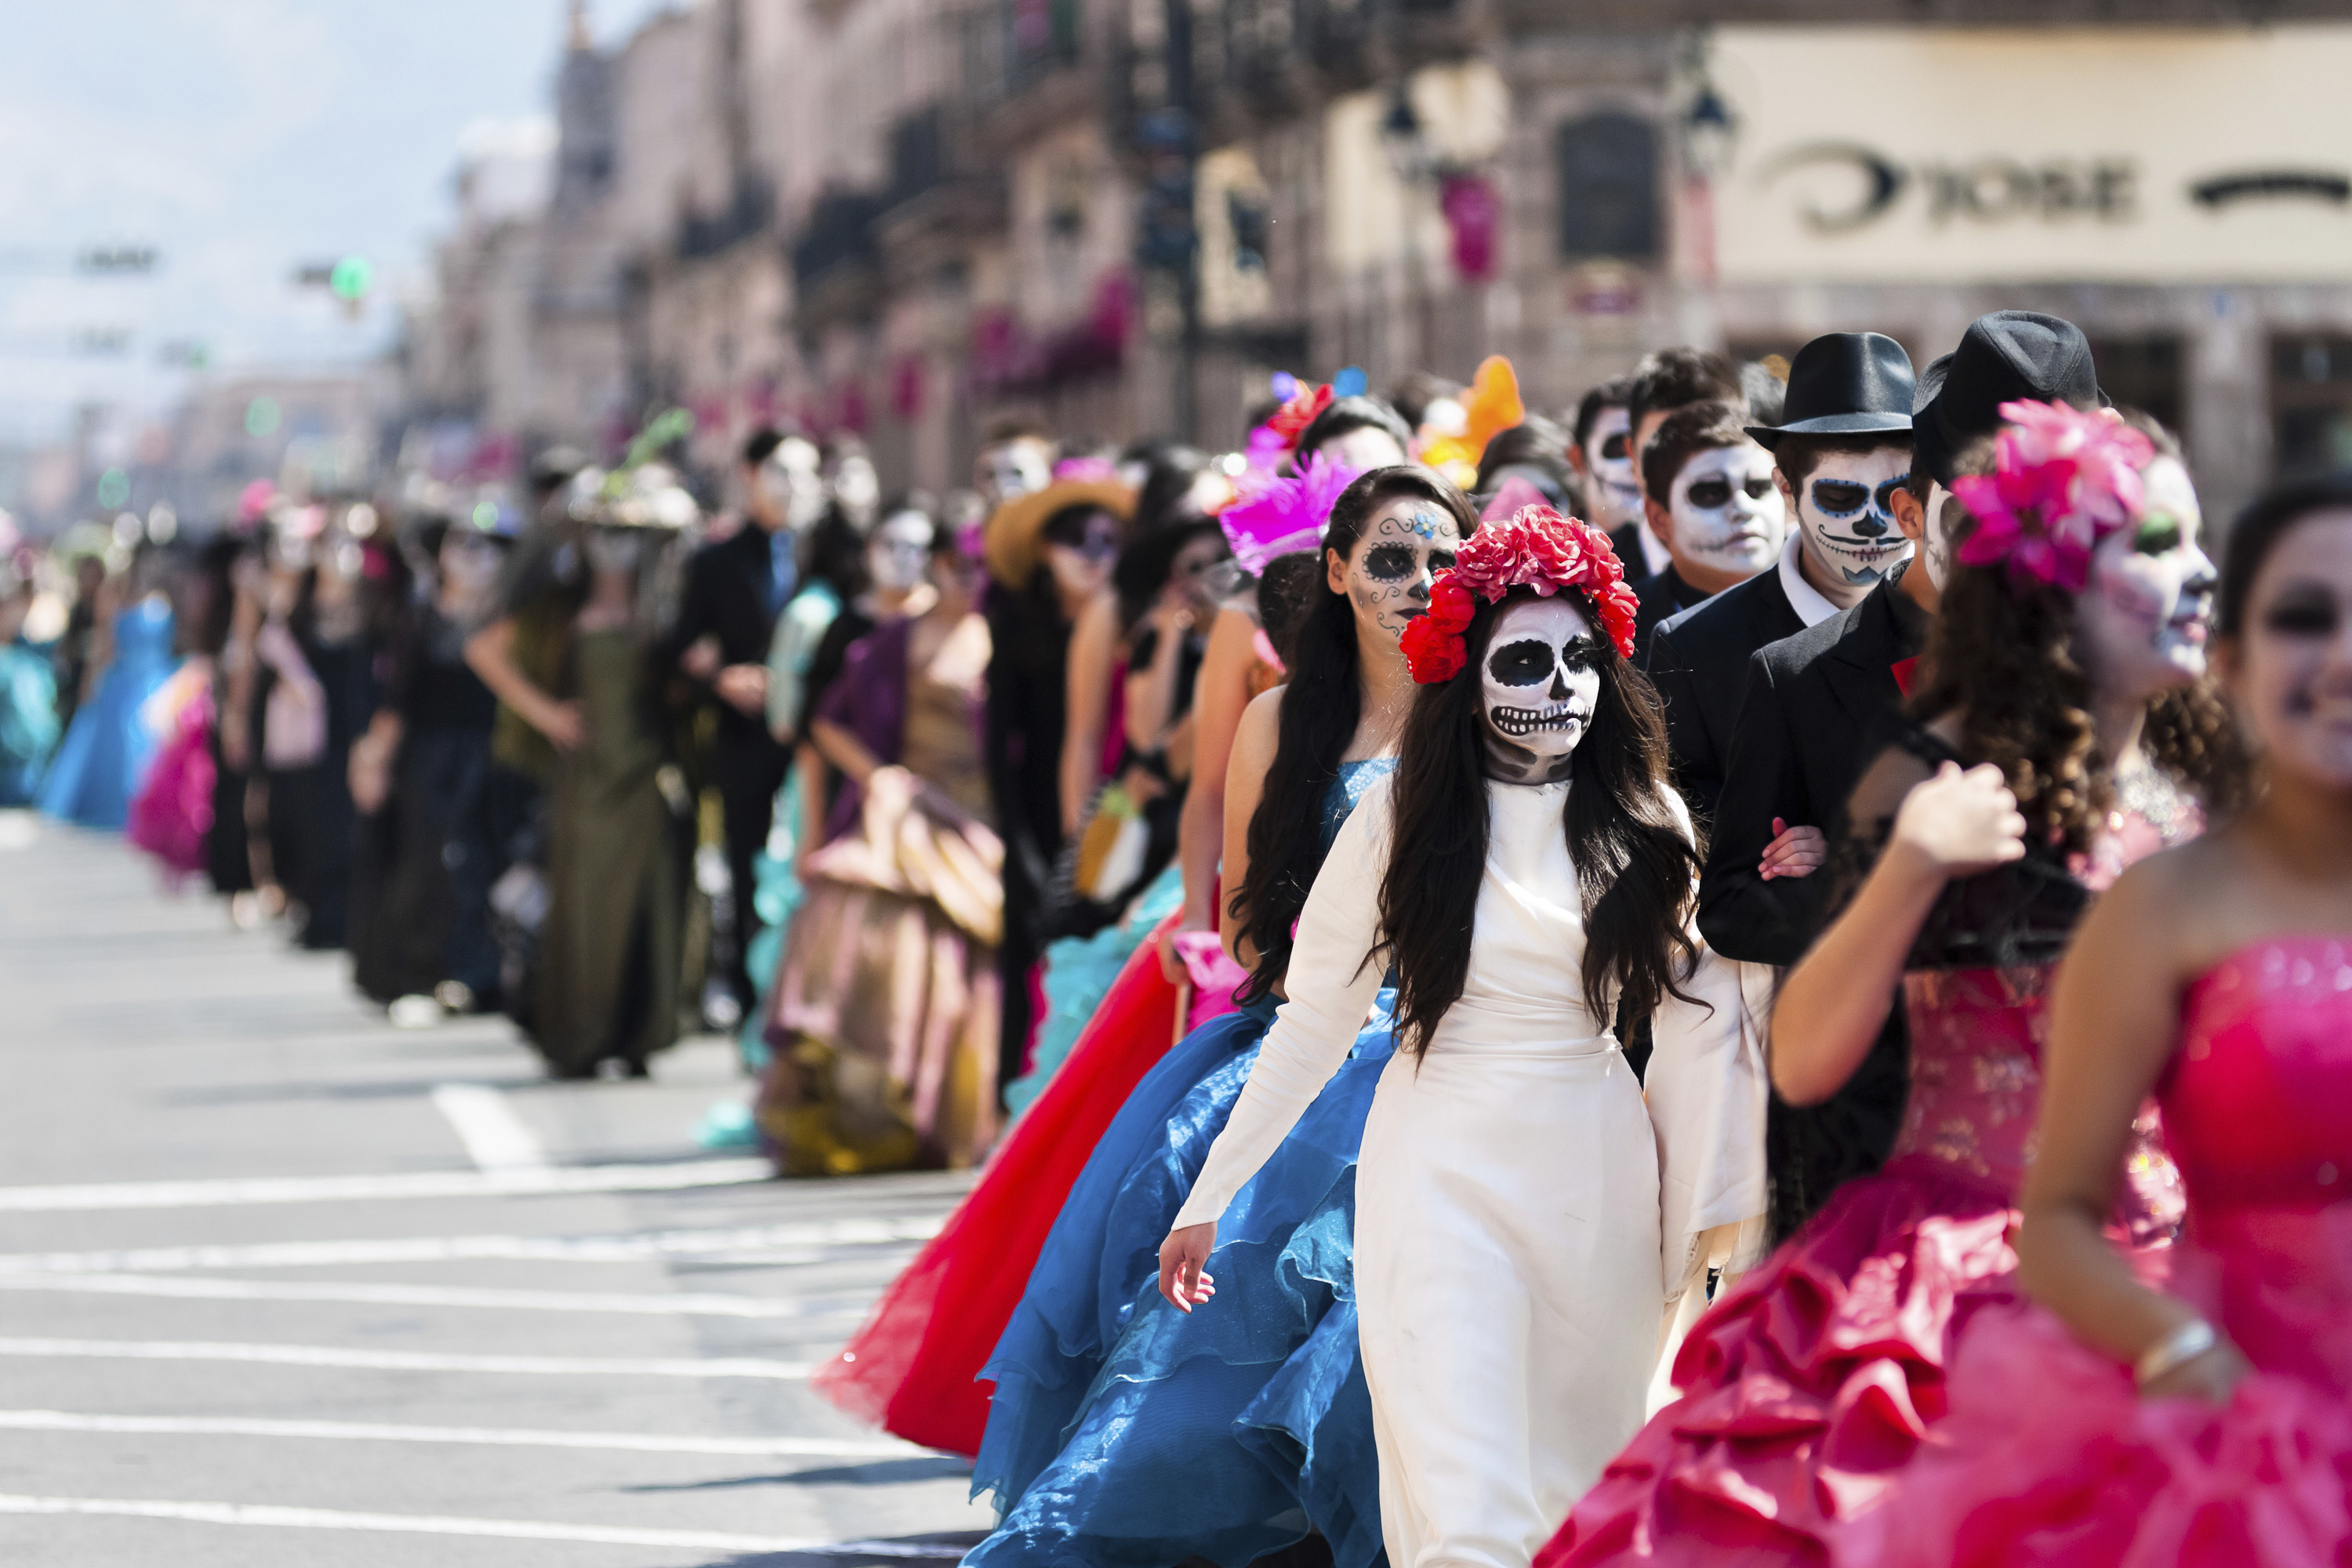 People in skull makeup and colorful costumes walking